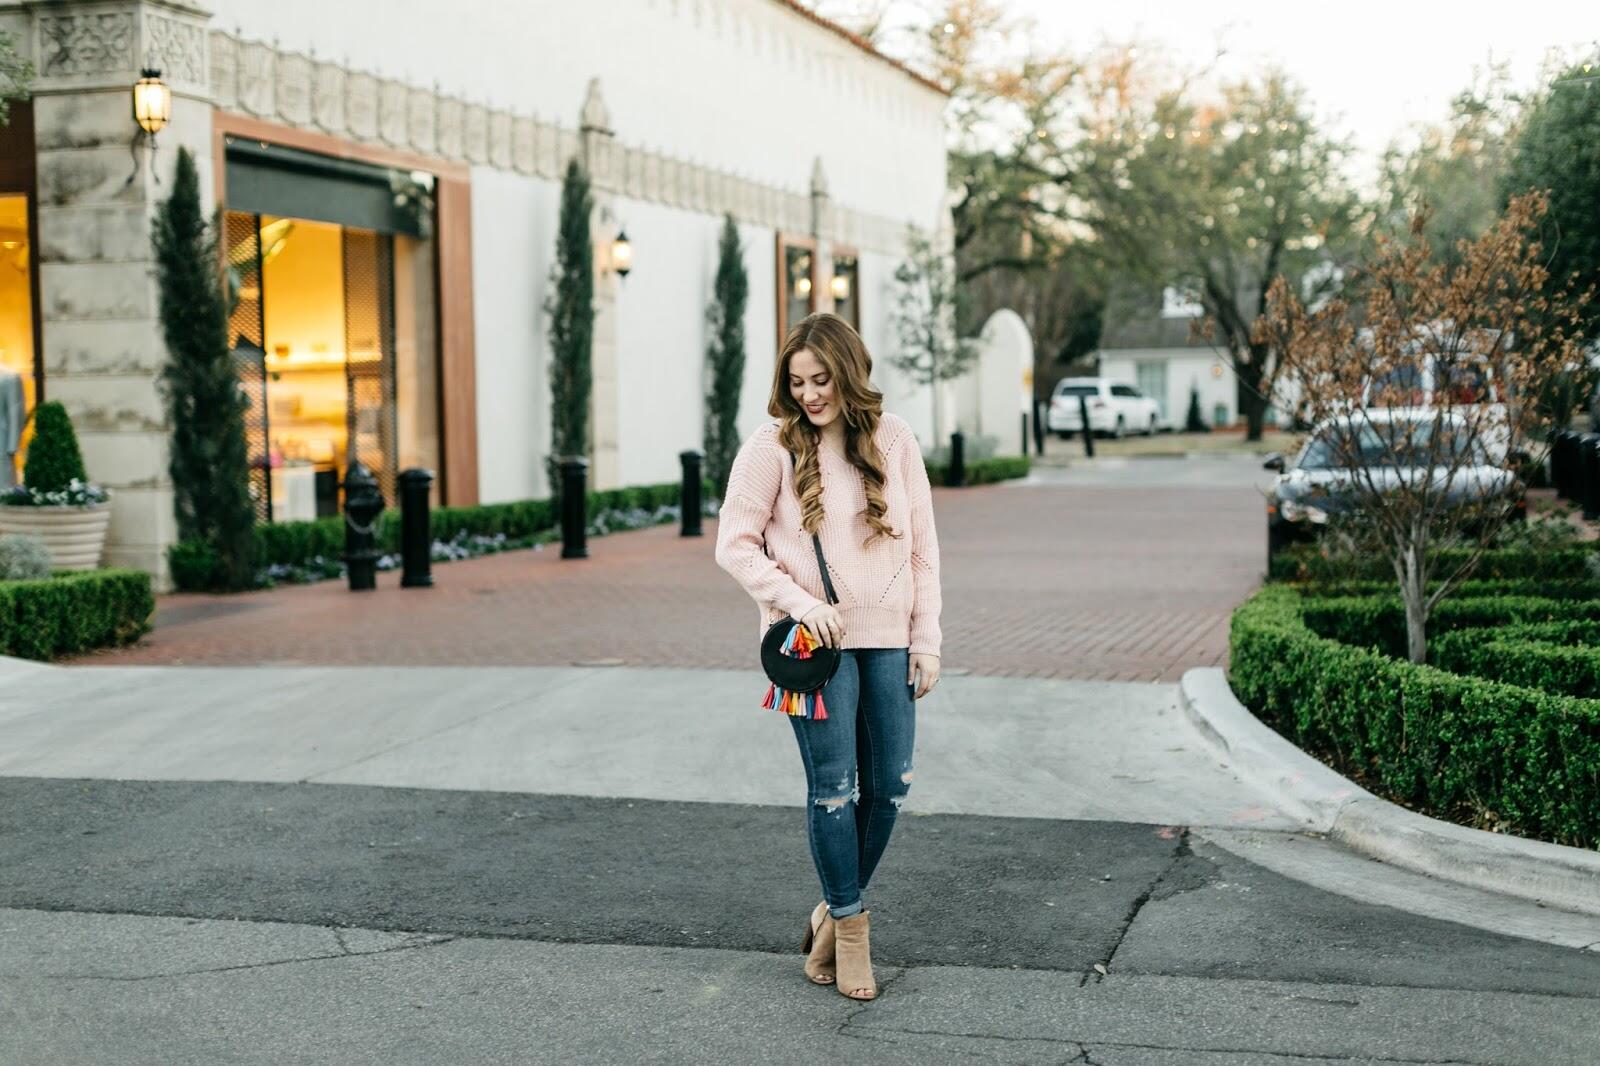 The Perfect Budget Friendly Lightweight Sweater to Transition from Winter to Spring by Walking in Memphis in High Heels